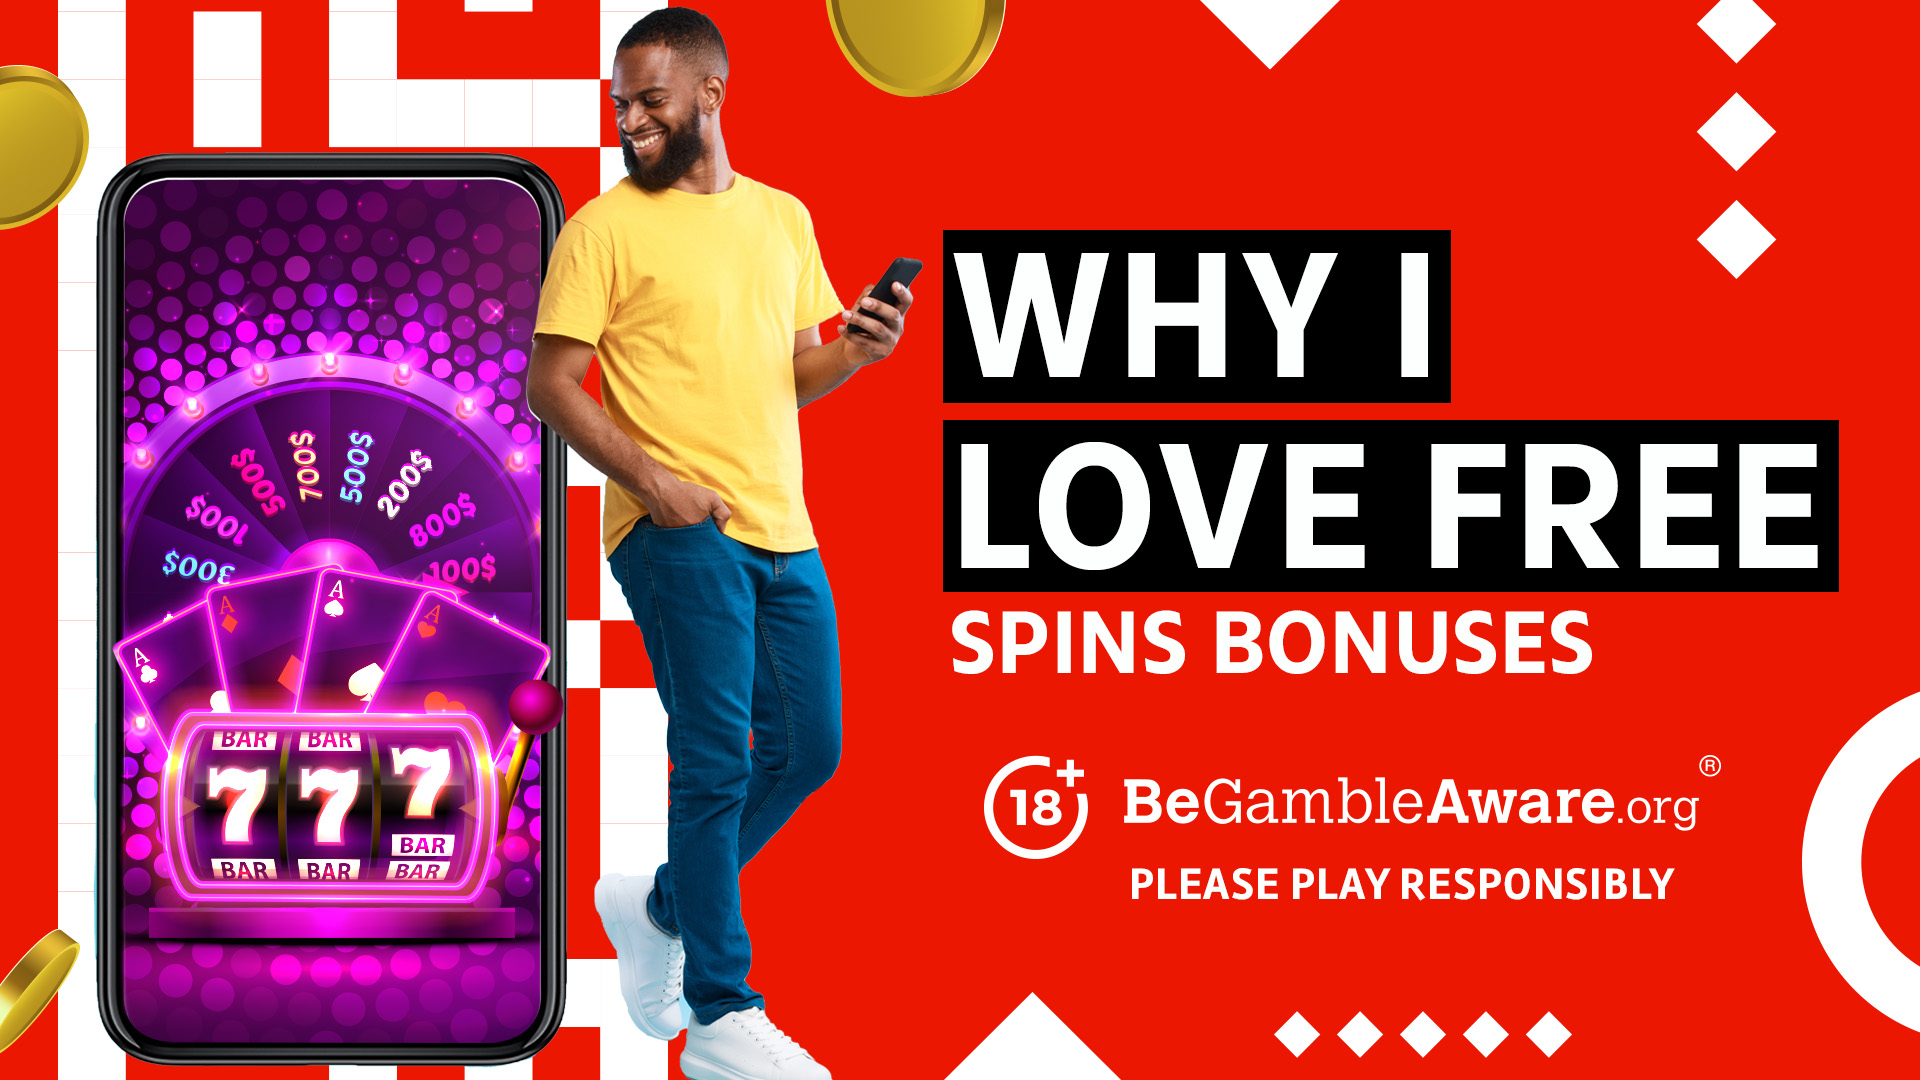 How to Make the Most of Casino Free Spins?